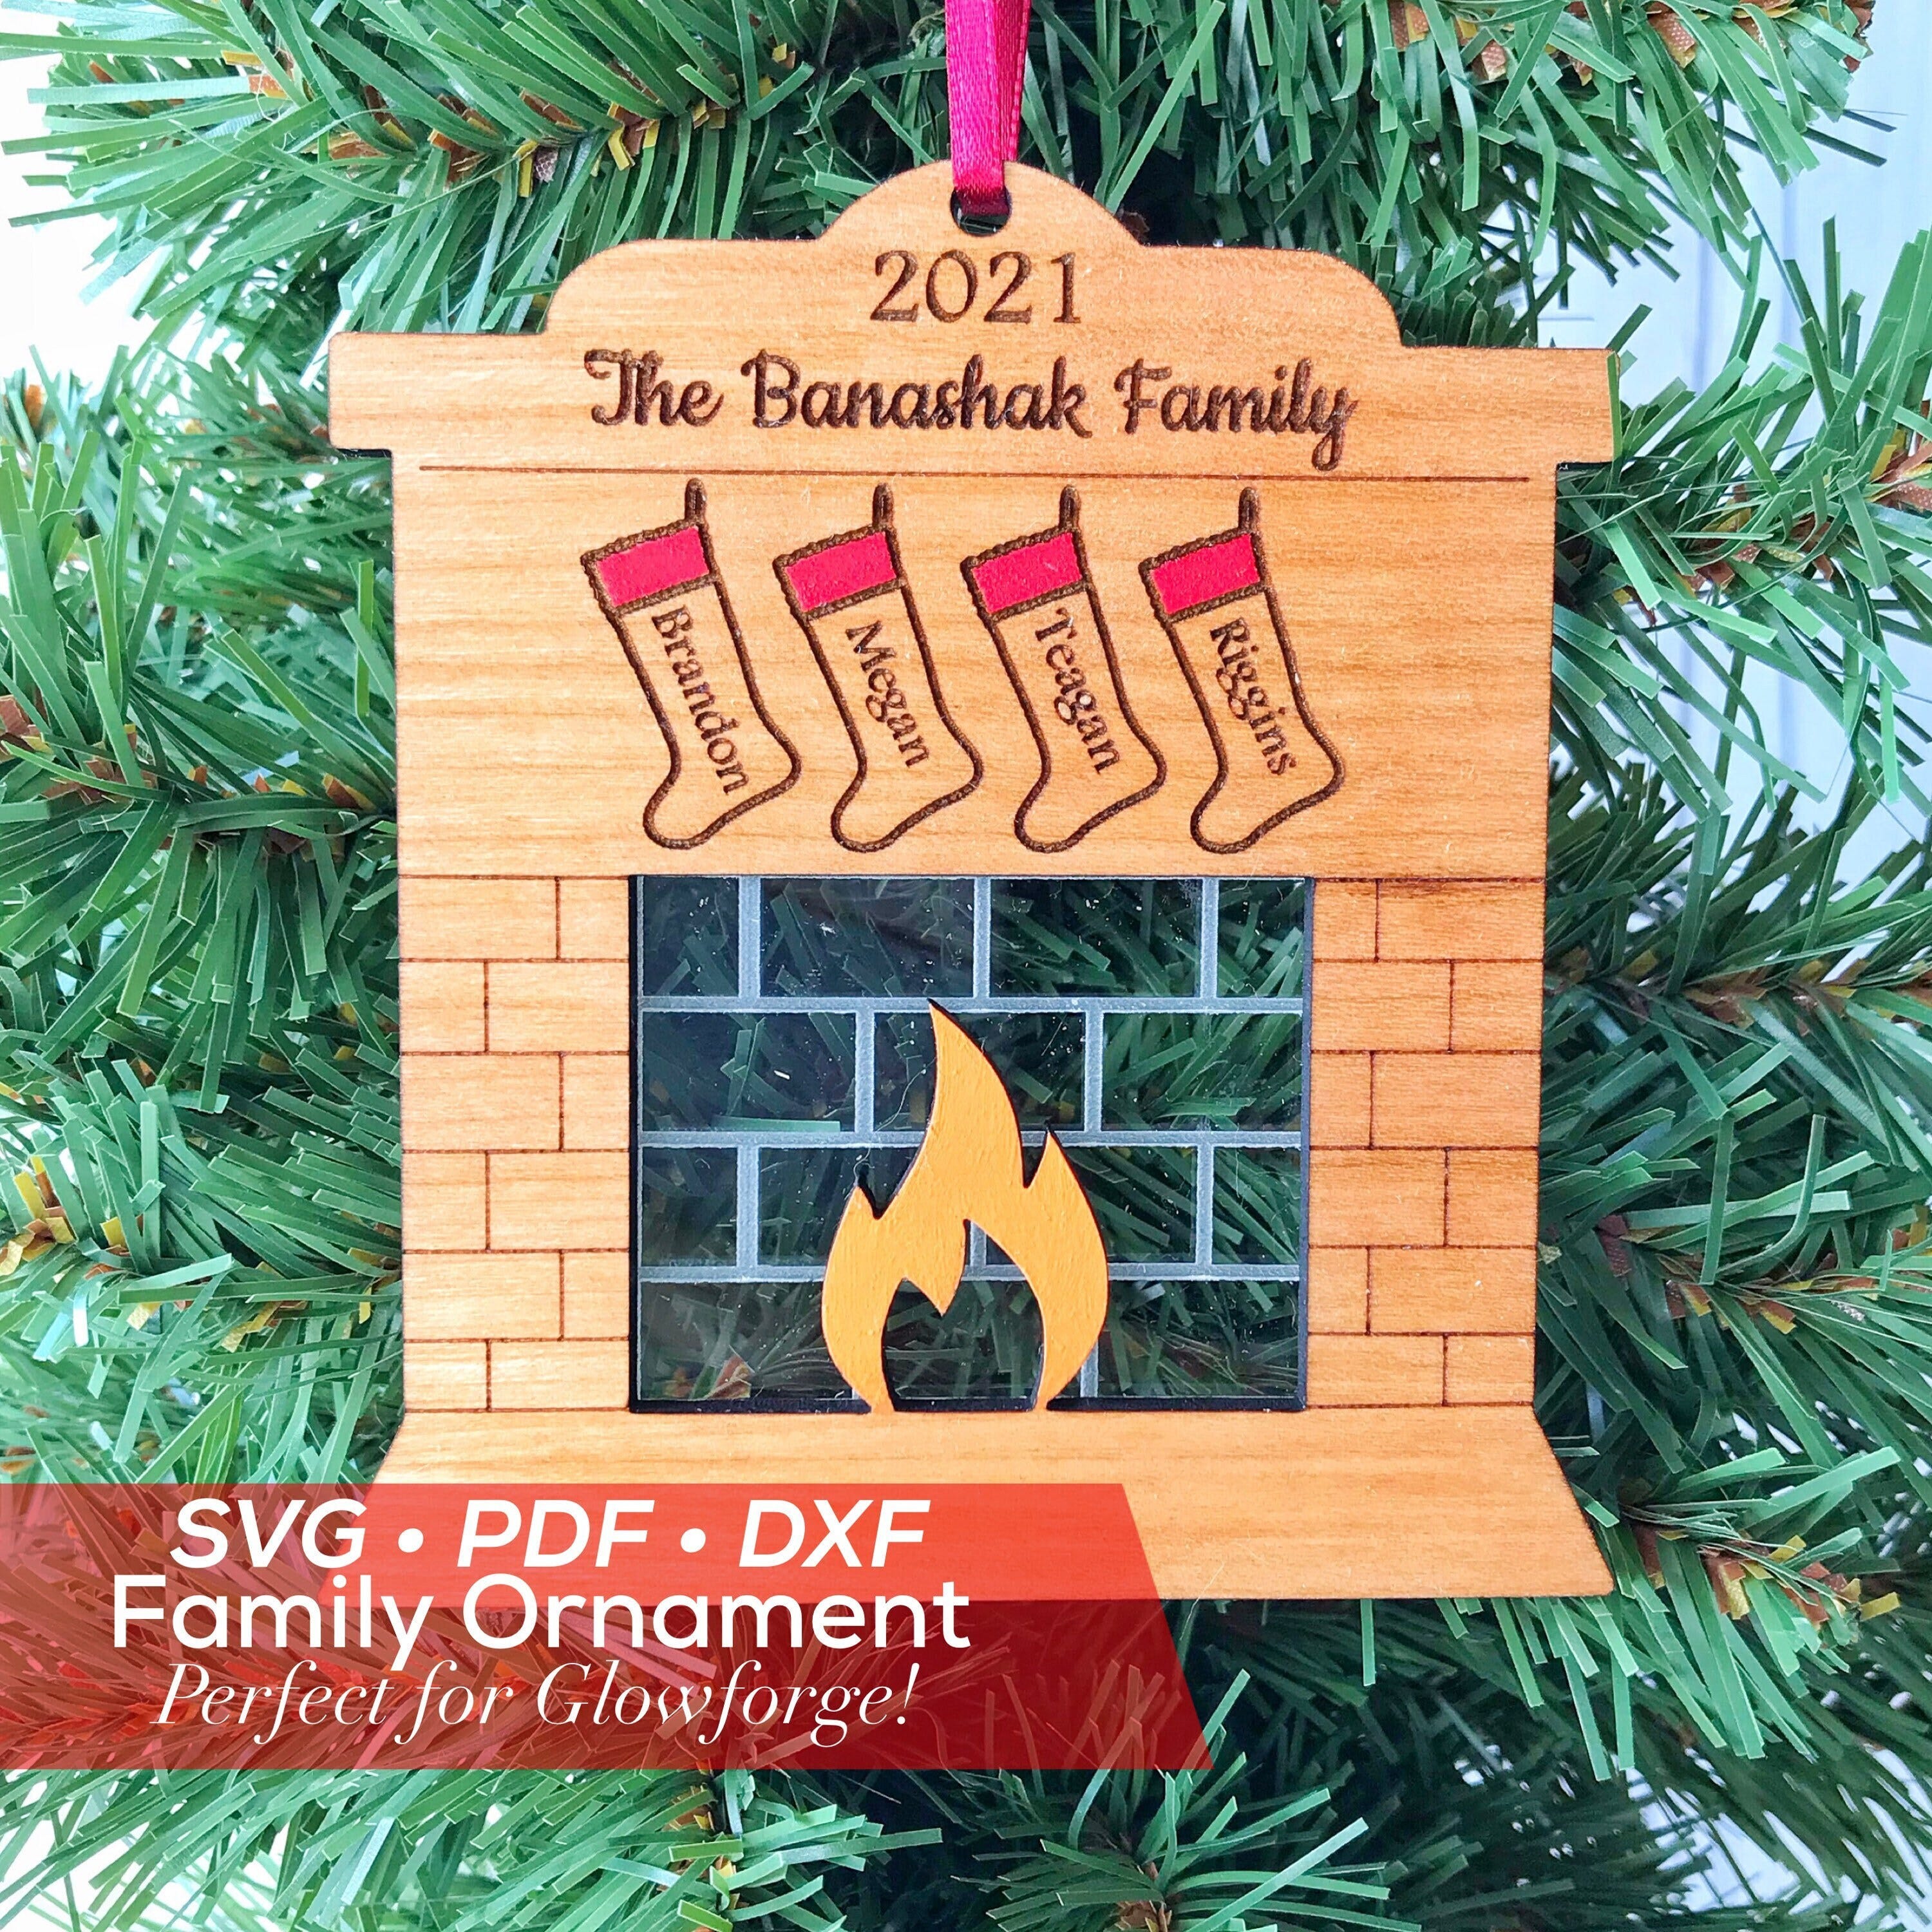 Fireplace Family Ornament SVG - Fireplace Ornament Digital File - Digital File for Glowforge